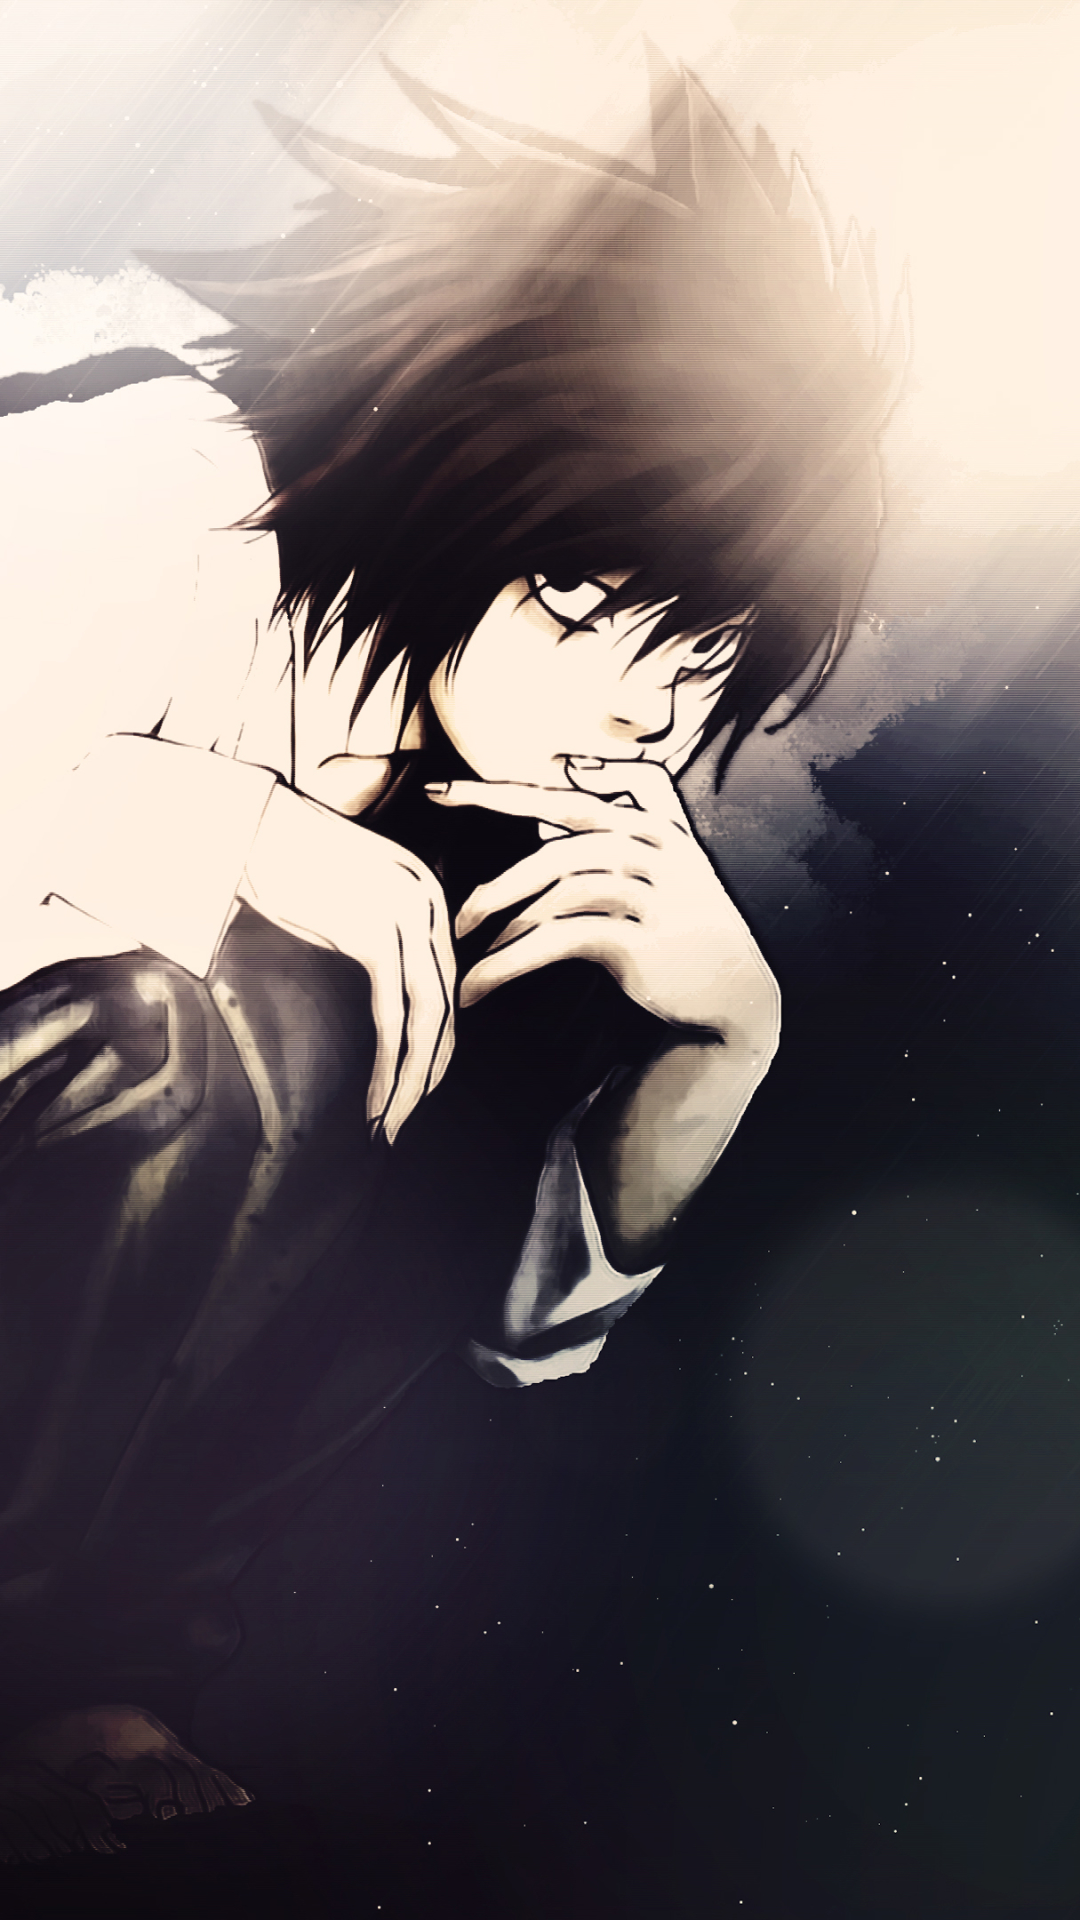 DEATH NOTE ANIME WALLPAPER PHONE